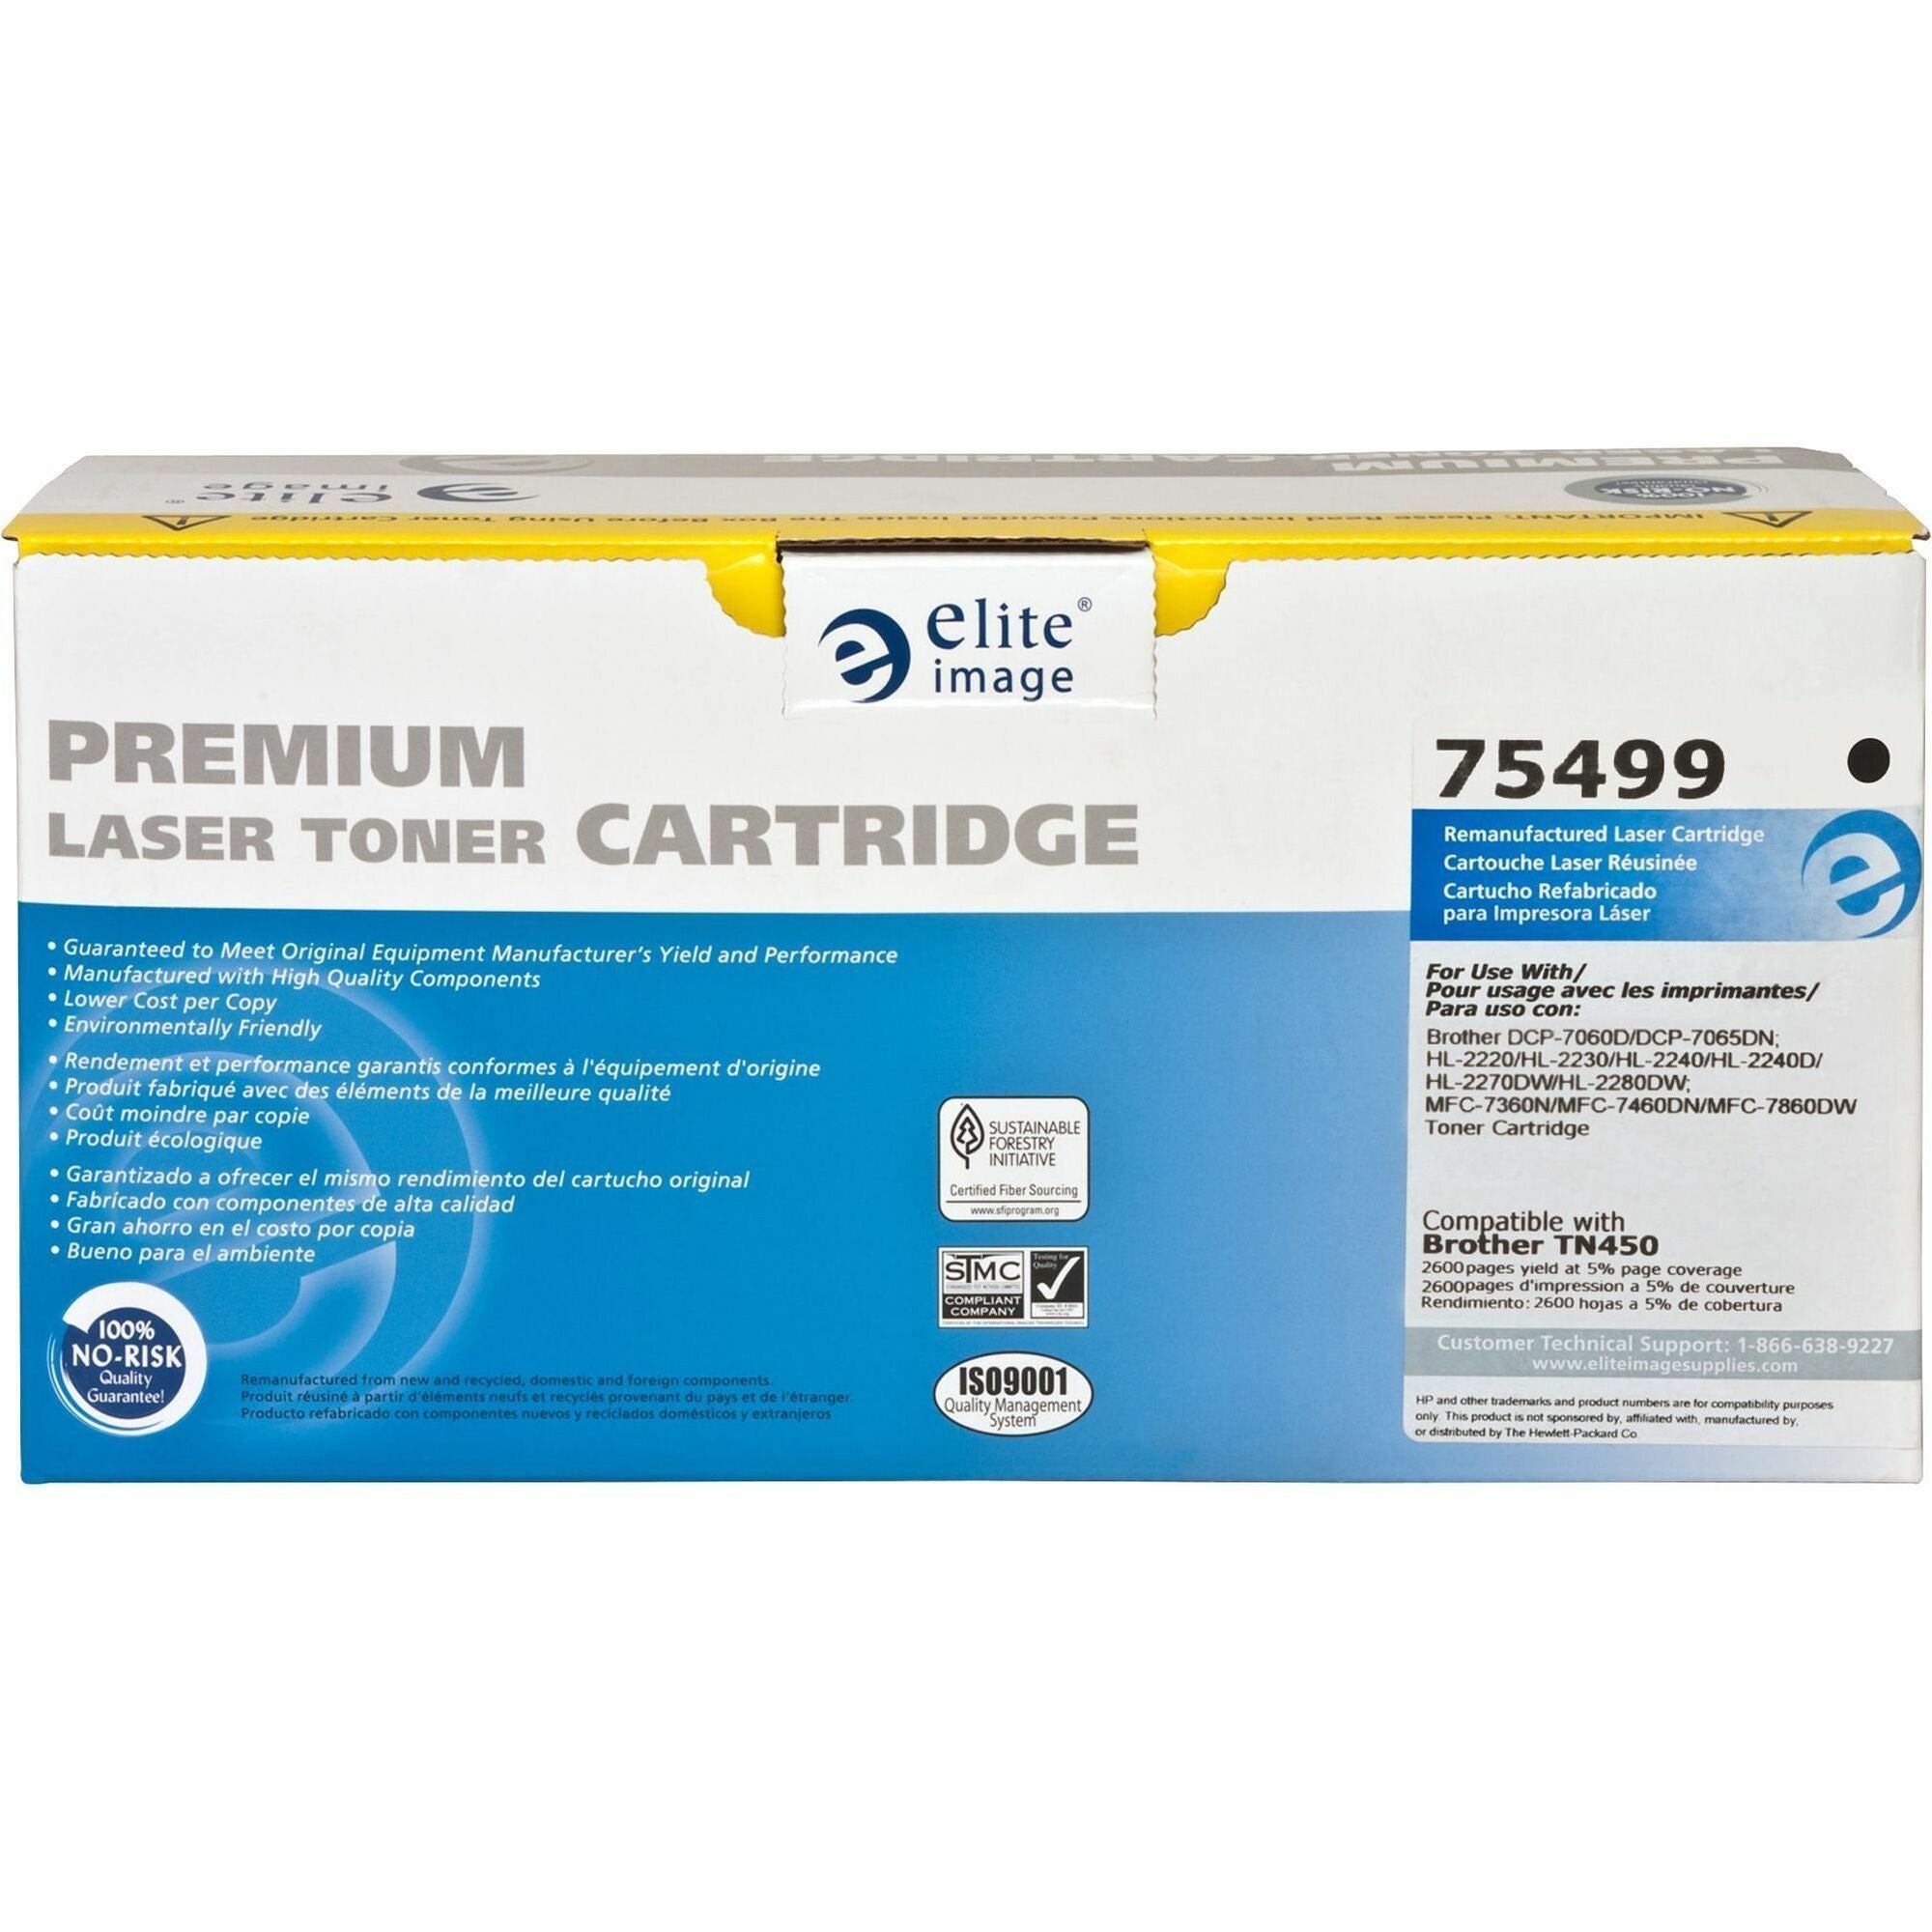 Elite Image Remanufactured High Yield Laser Toner Cartridge - Alternative for Brother TN450 - Black - 1 Each - 2600 Pages - 1